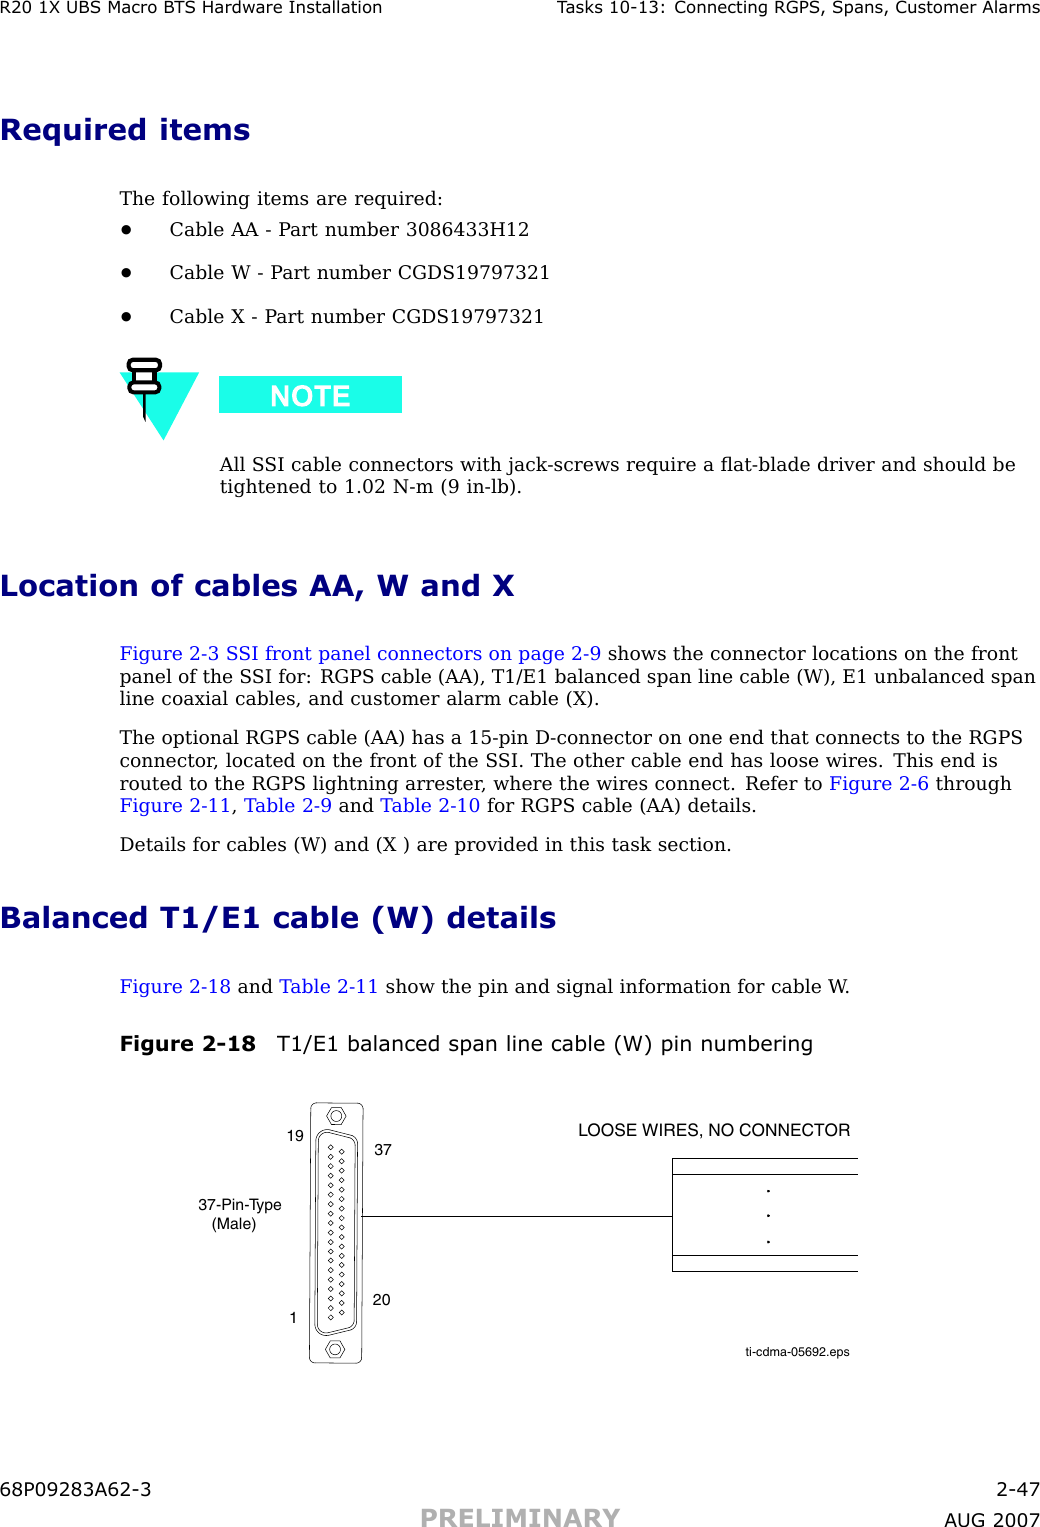 R20 1X UBS Macro B T S Hardw are Installation T asks 10 -13: Connecting RGPS , Spans, Customer AlarmsRequired itemsThe following items are required:•Cable AA - P art number 3086433H12•Cable W - P art number CGDS19797321•Cable X - P art number CGDS19797321All S SI cable connectors with jack -screws require a ﬂat -blade driver and should betightened to 1.02 N -m (9 in -lb).Location of cables AA, W and XFigure 2 -3 S SI front panel connectors on page 2 - 9 shows the connector locations on the frontpanel of the S SI for: RGPS cable (AA), T1/E1 balanced span line cable (W), E1 unbalanced spanline coaxial cables, and customer alarm cable (X).The optional RGPS cable (AA) has a 15 -pin D -connector on one end that connects to the RGPSconnector , located on the front of the S SI. The other cable end has loose wires. This end isrouted to the RGPS lightning arrester , where the wires connect. Refer to Figure 2 -6 throughFigure 2 -11 ,T able 2 -9 and T able 2 -10 for RGPS cable (AA) details.Details for cables (W) and (X ) are provided in this task section.Balanced T1/E1 cable (W) detailsFigure 2 -18 and T able 2 -11 show the pin and signal information for cable W .Figure 2 -18 T1/E1 balanced span line cable (W) pin numberingti-cdma-05692.epsLOOSE WIRES, NO CONNECTOR37-Pin-Type   (Male)119 372068P09283A62 -3 2 -47PRELIMINARY A UG 2007